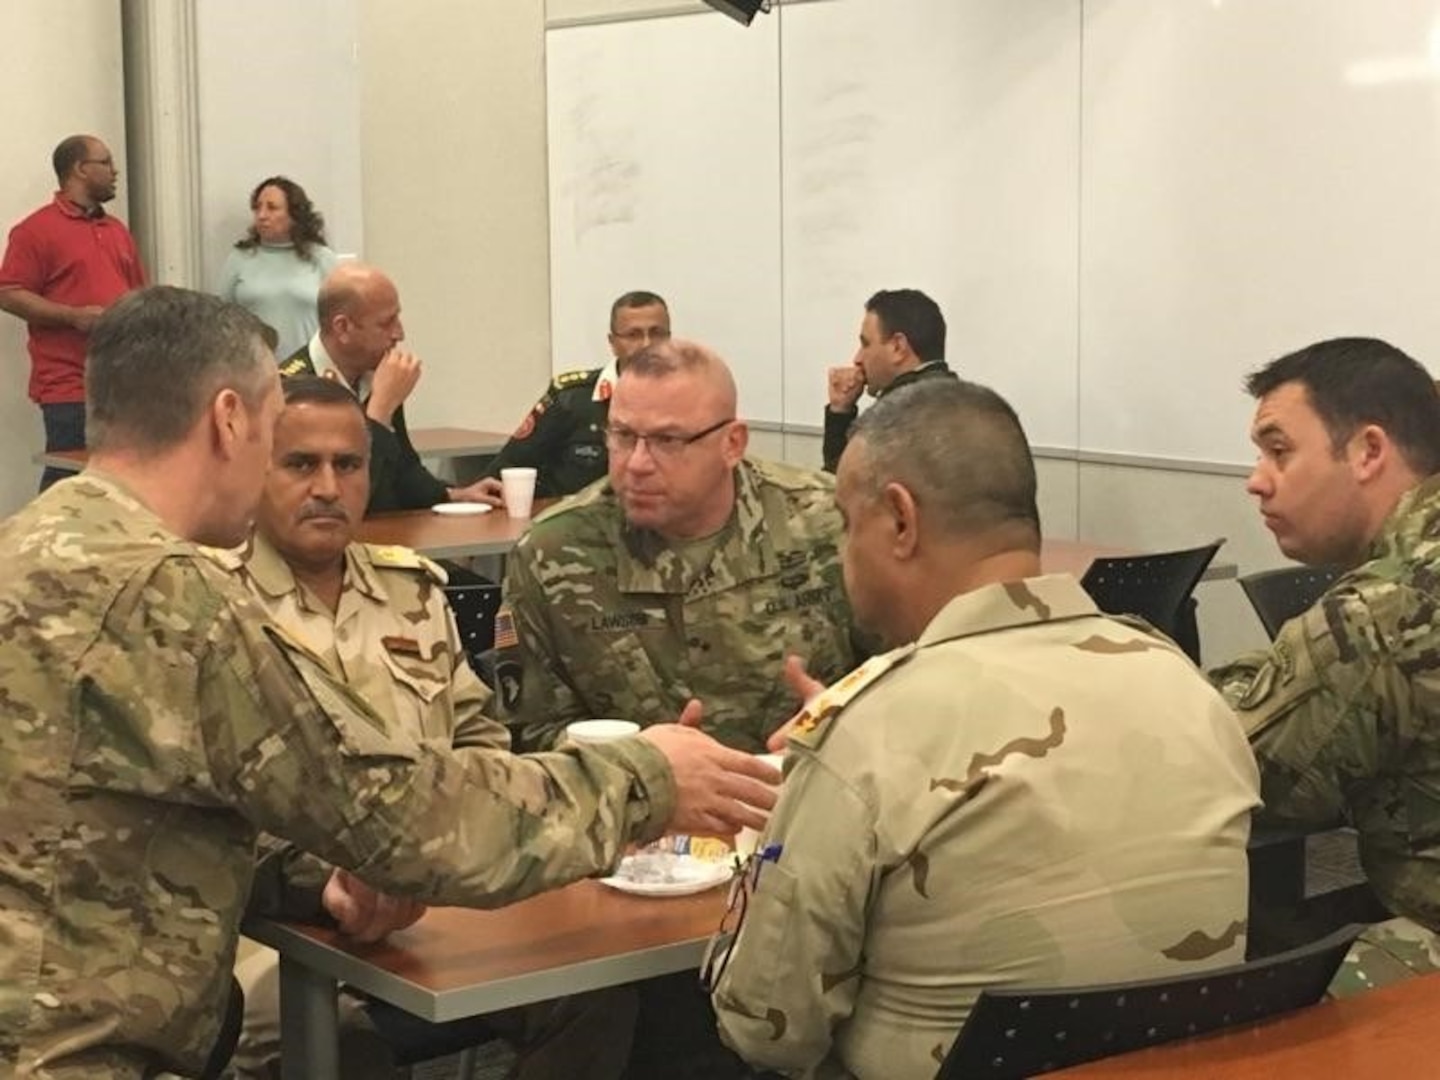 In September 2016, Lawson leads a logistics symposium at Central Command Headquarters, Tampa Florida, with 13 countries from the Middle East, Gulf Coast countries, Levant and Central Asia to improve International Coalition interoperability in the Central Command area of responsibility.